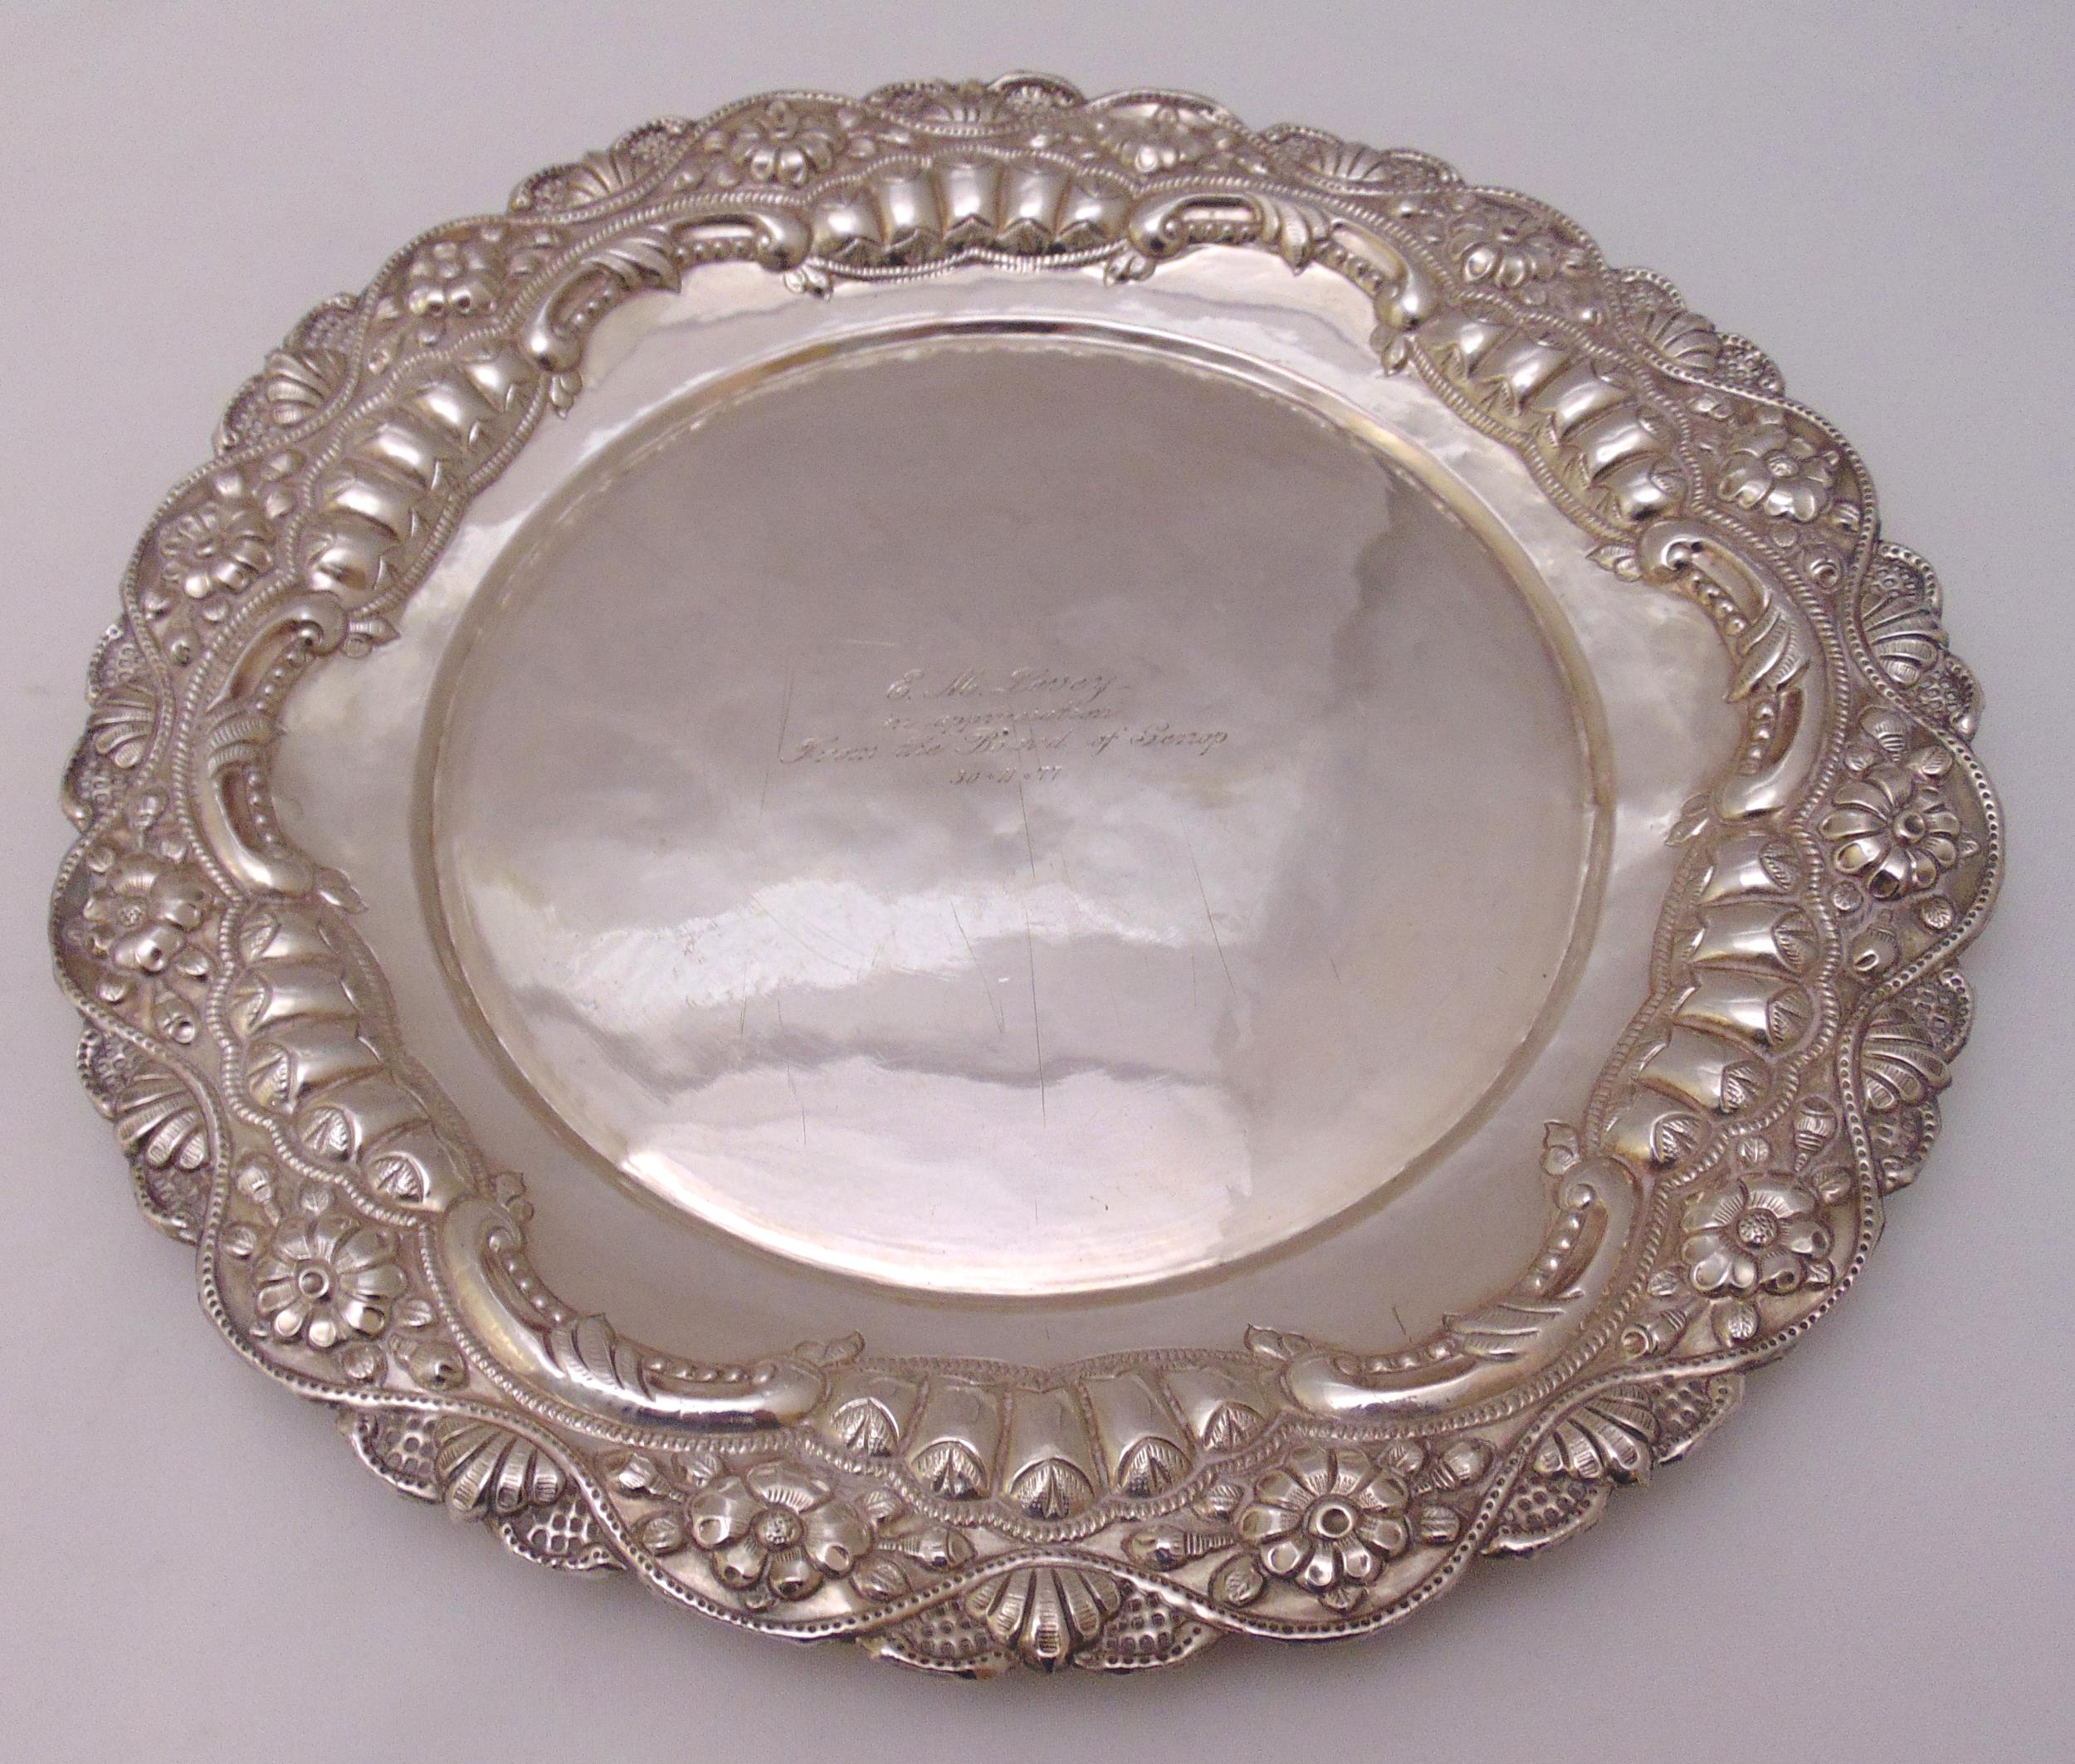 A white metal circular presentation salver with florally chased and pierced border, approx total